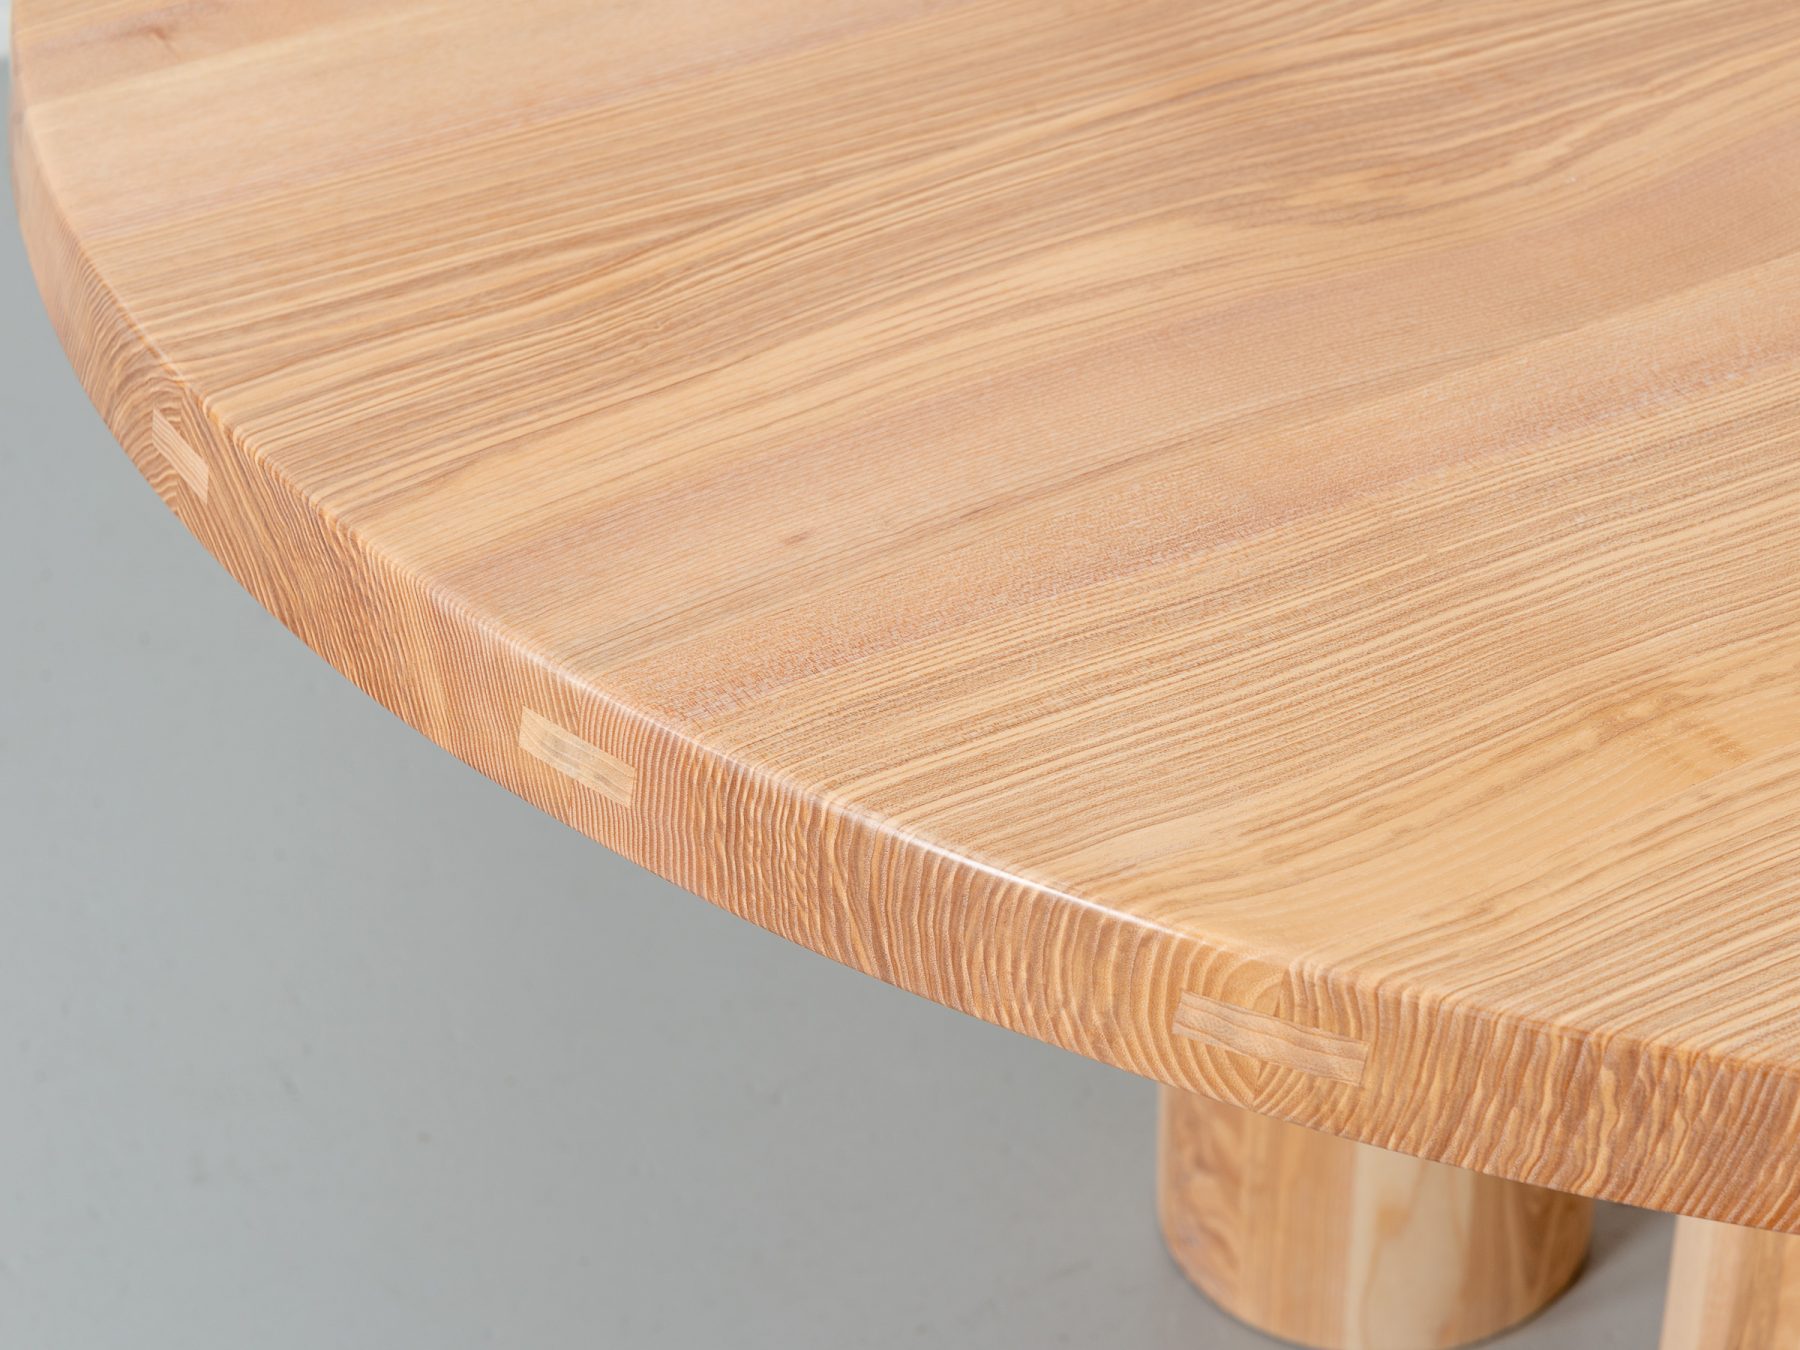 Medium Pier round table made from either Scottish Elm or British Oak, 3 staved round legs supported by an all timber frame, table top constructed with loose tongue joinery